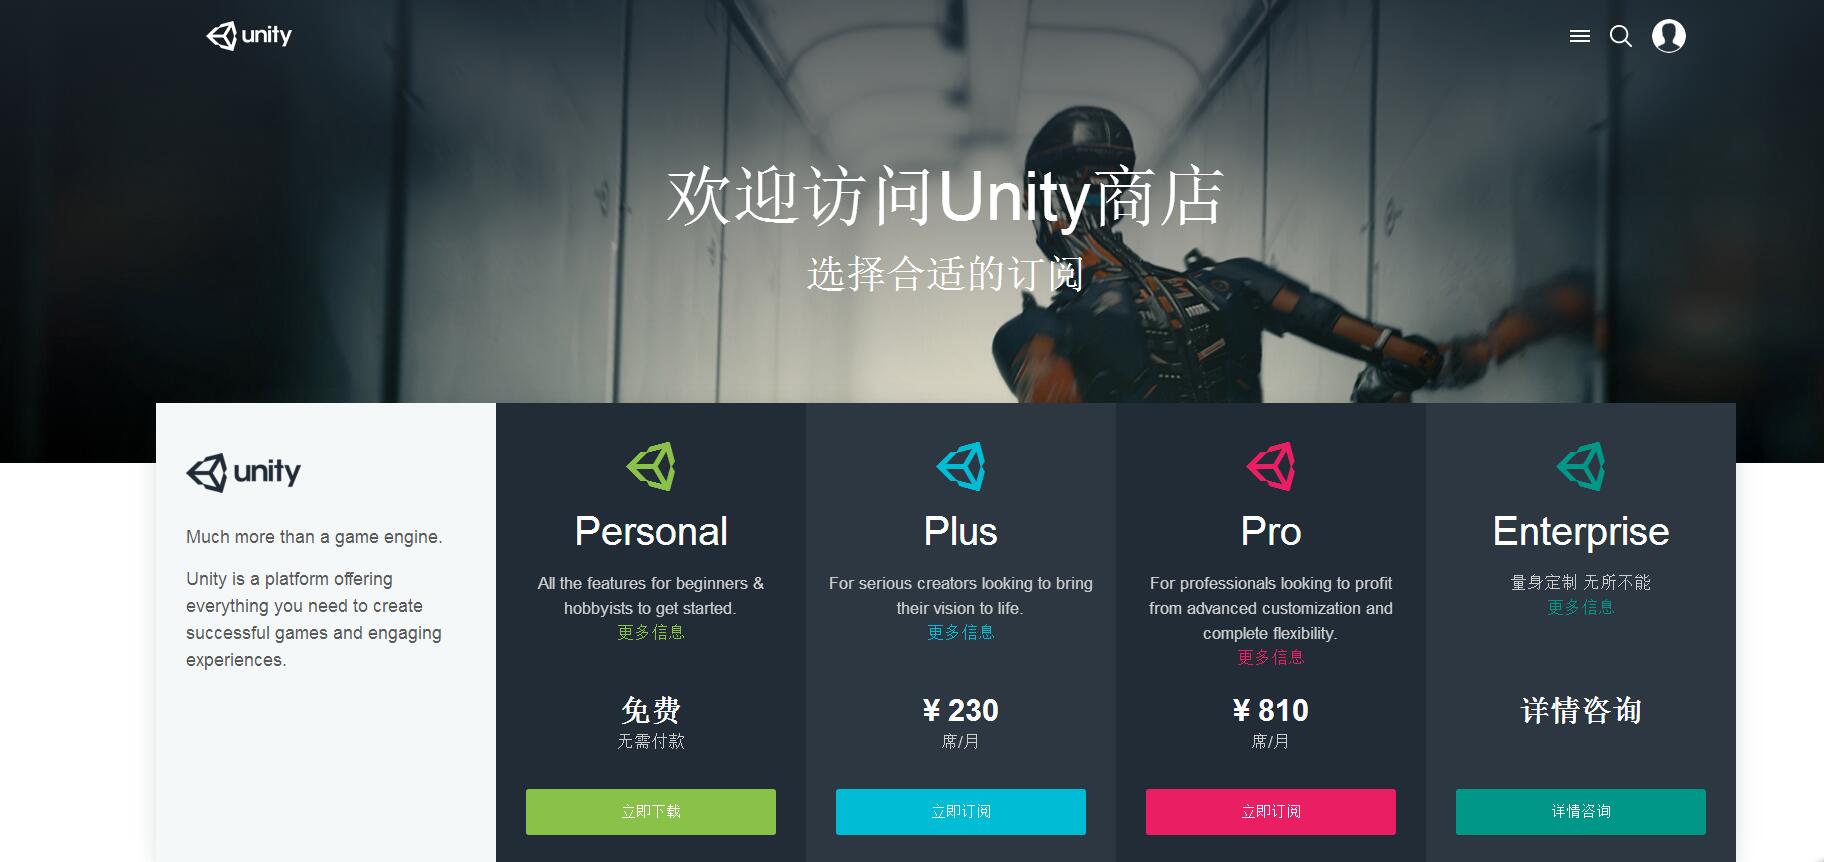 Unity official website download